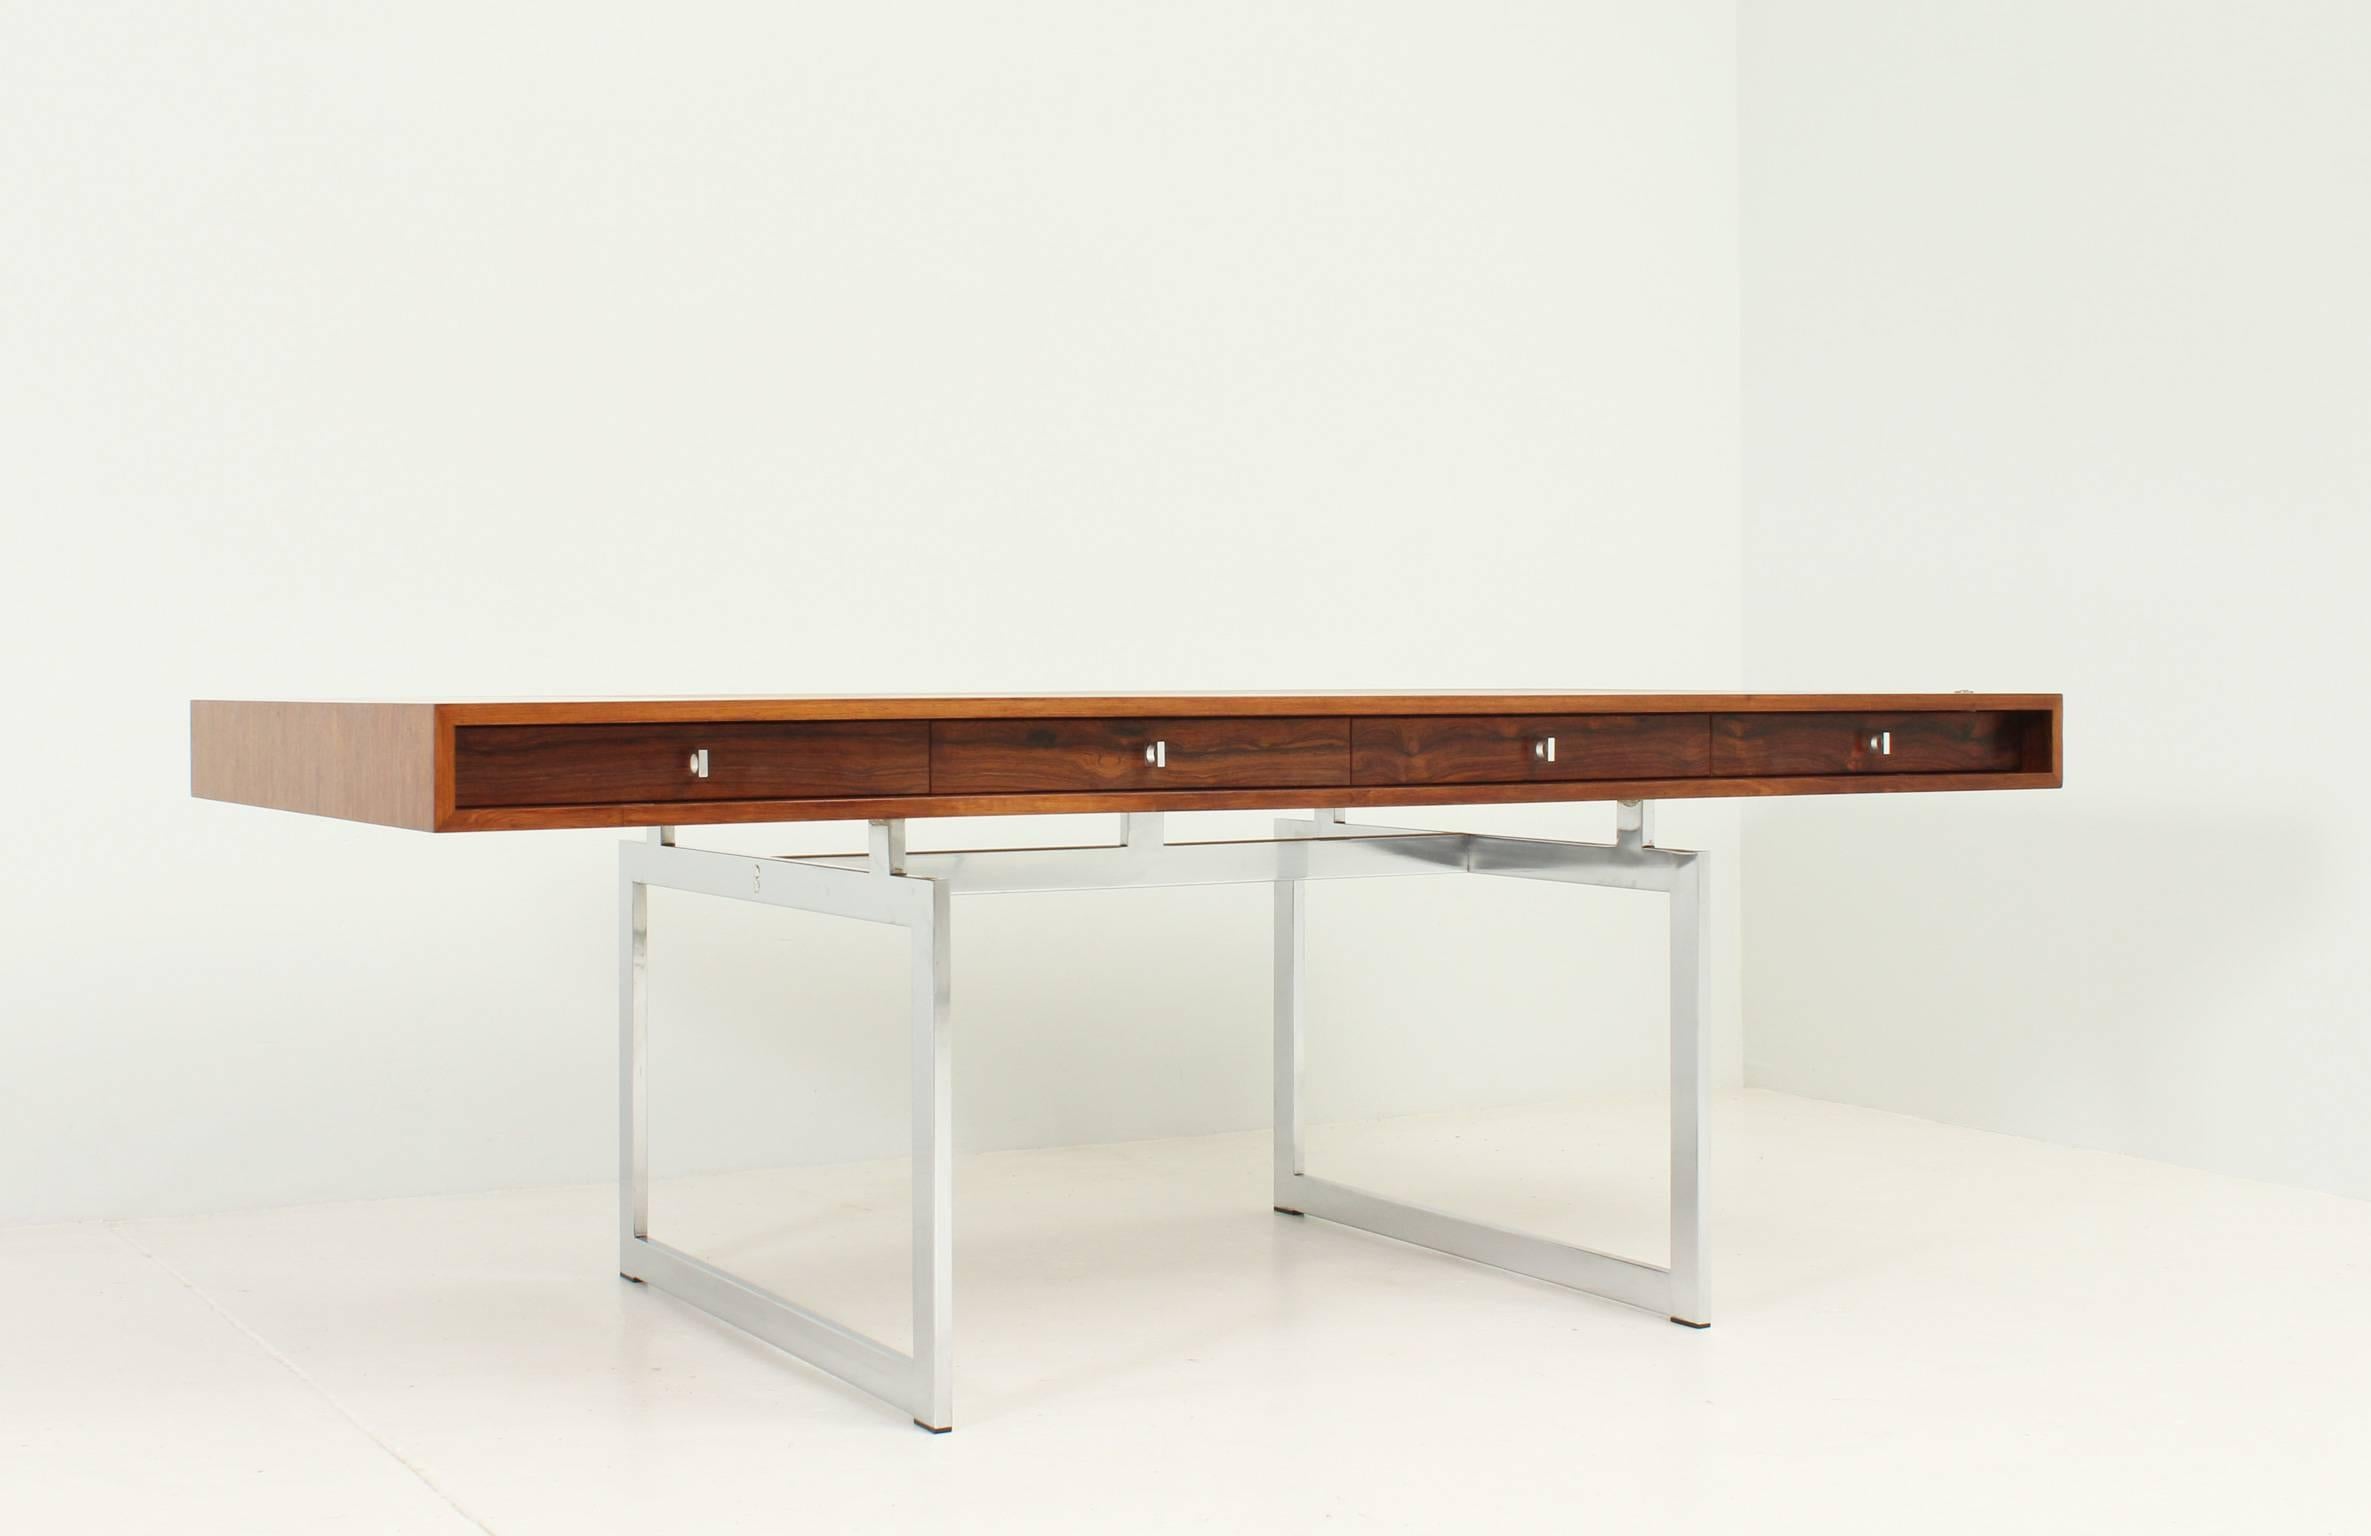 Large desk designed by Bodil Kjaer in 1959 for E. Pedersen and Søns, Denmark. Rio rosewood top and steel base with four drawers.